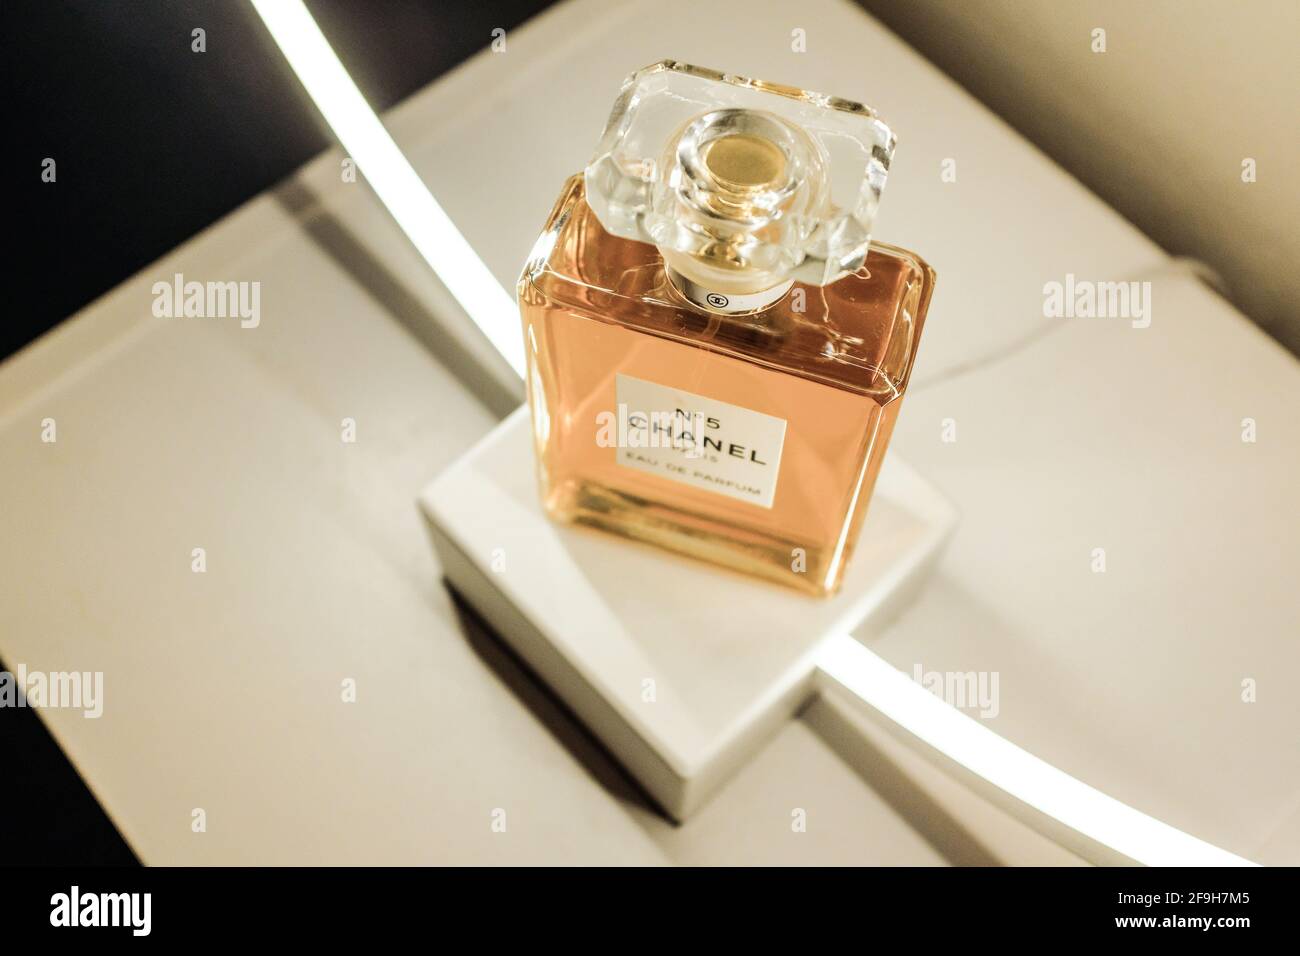 AUSTIN, UNITED STATES - Dec 09, 2020: Beautiful looking Chanel No 5 perfume  bottle taken with circular ring light Stock Photo - Alamy